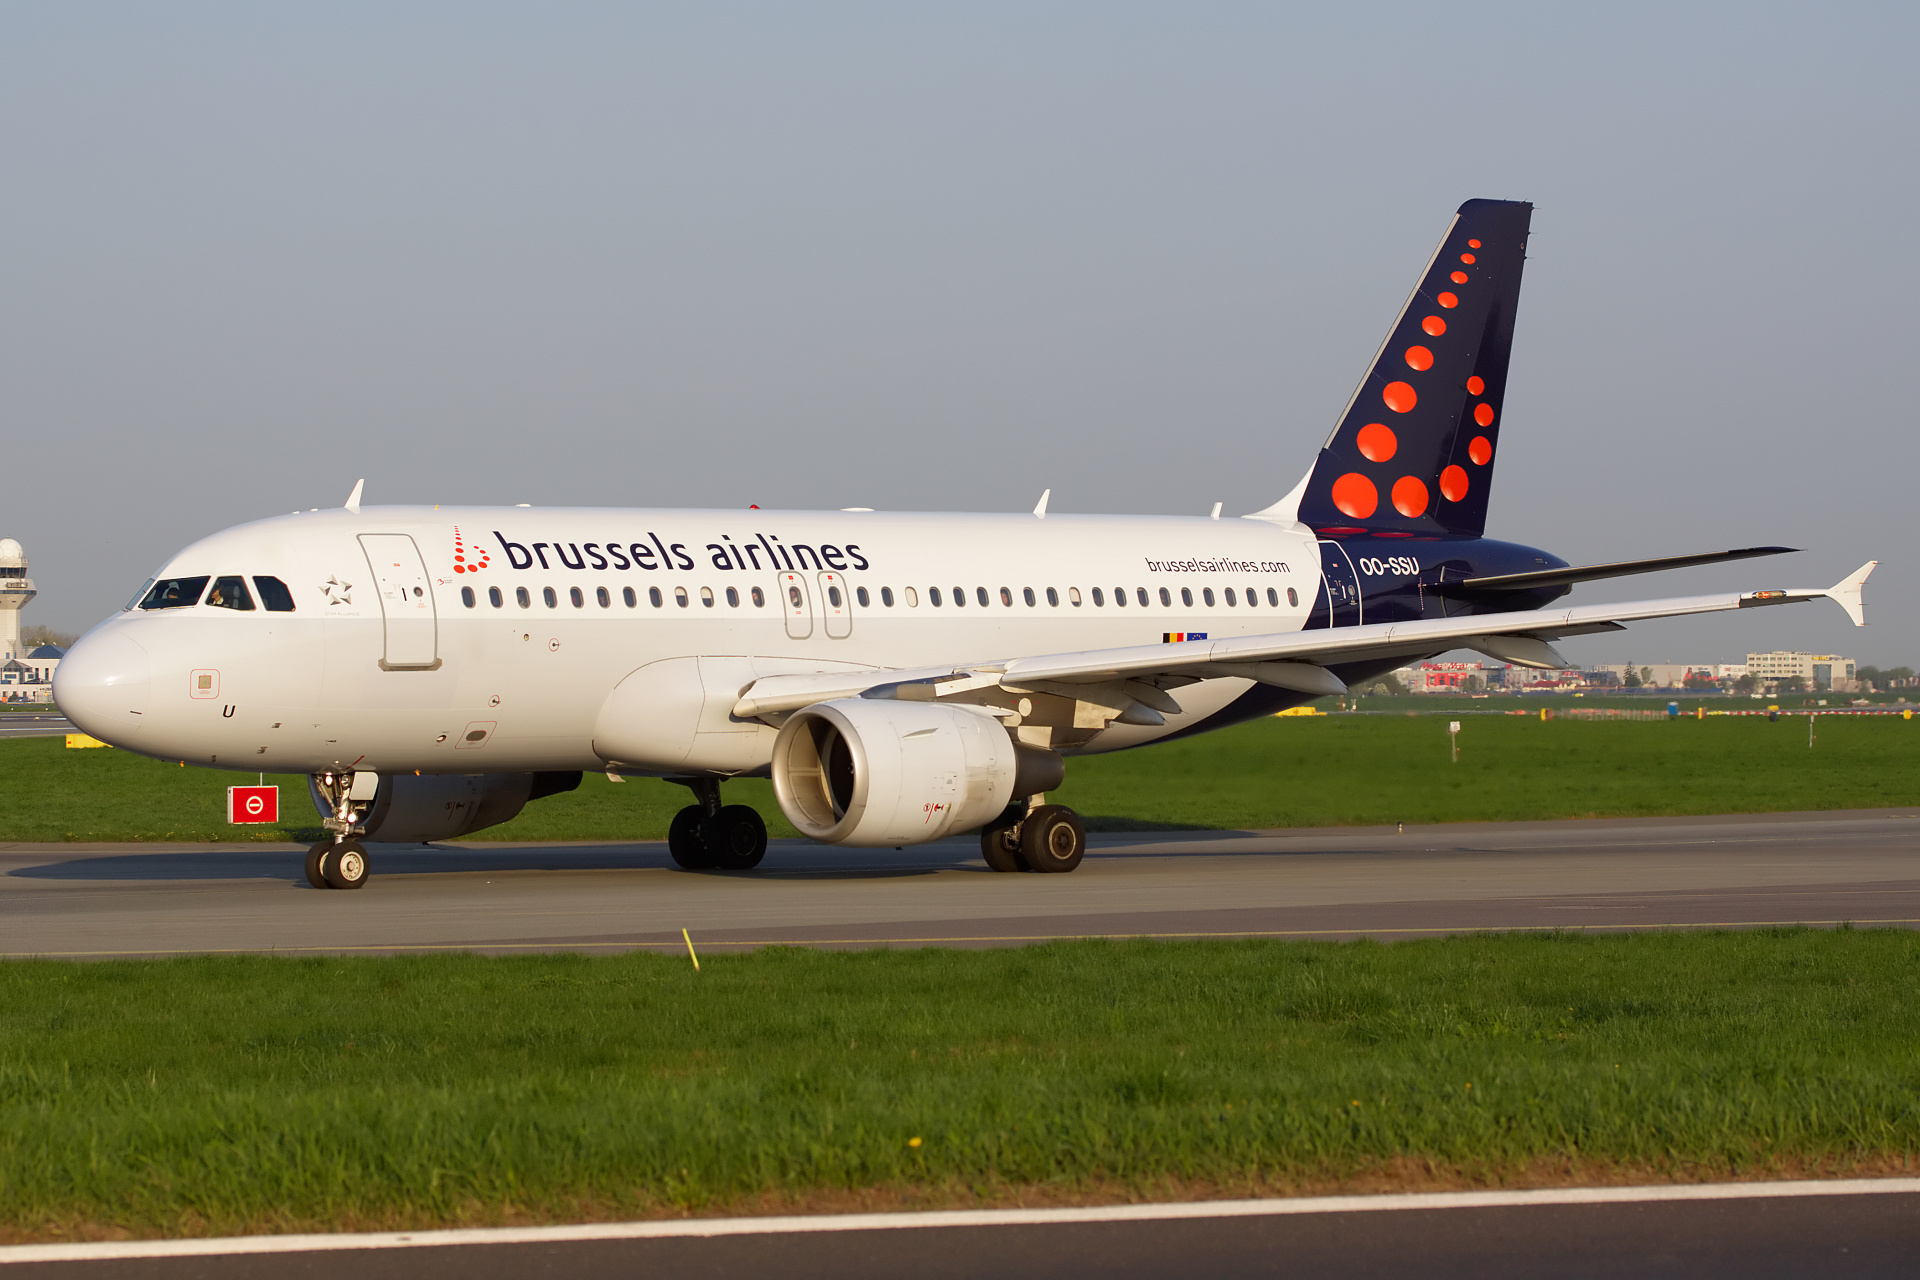 OO-SSU (Samoloty » Spotting na EPWA » Airbus A319-100 » Brussels Airlines)